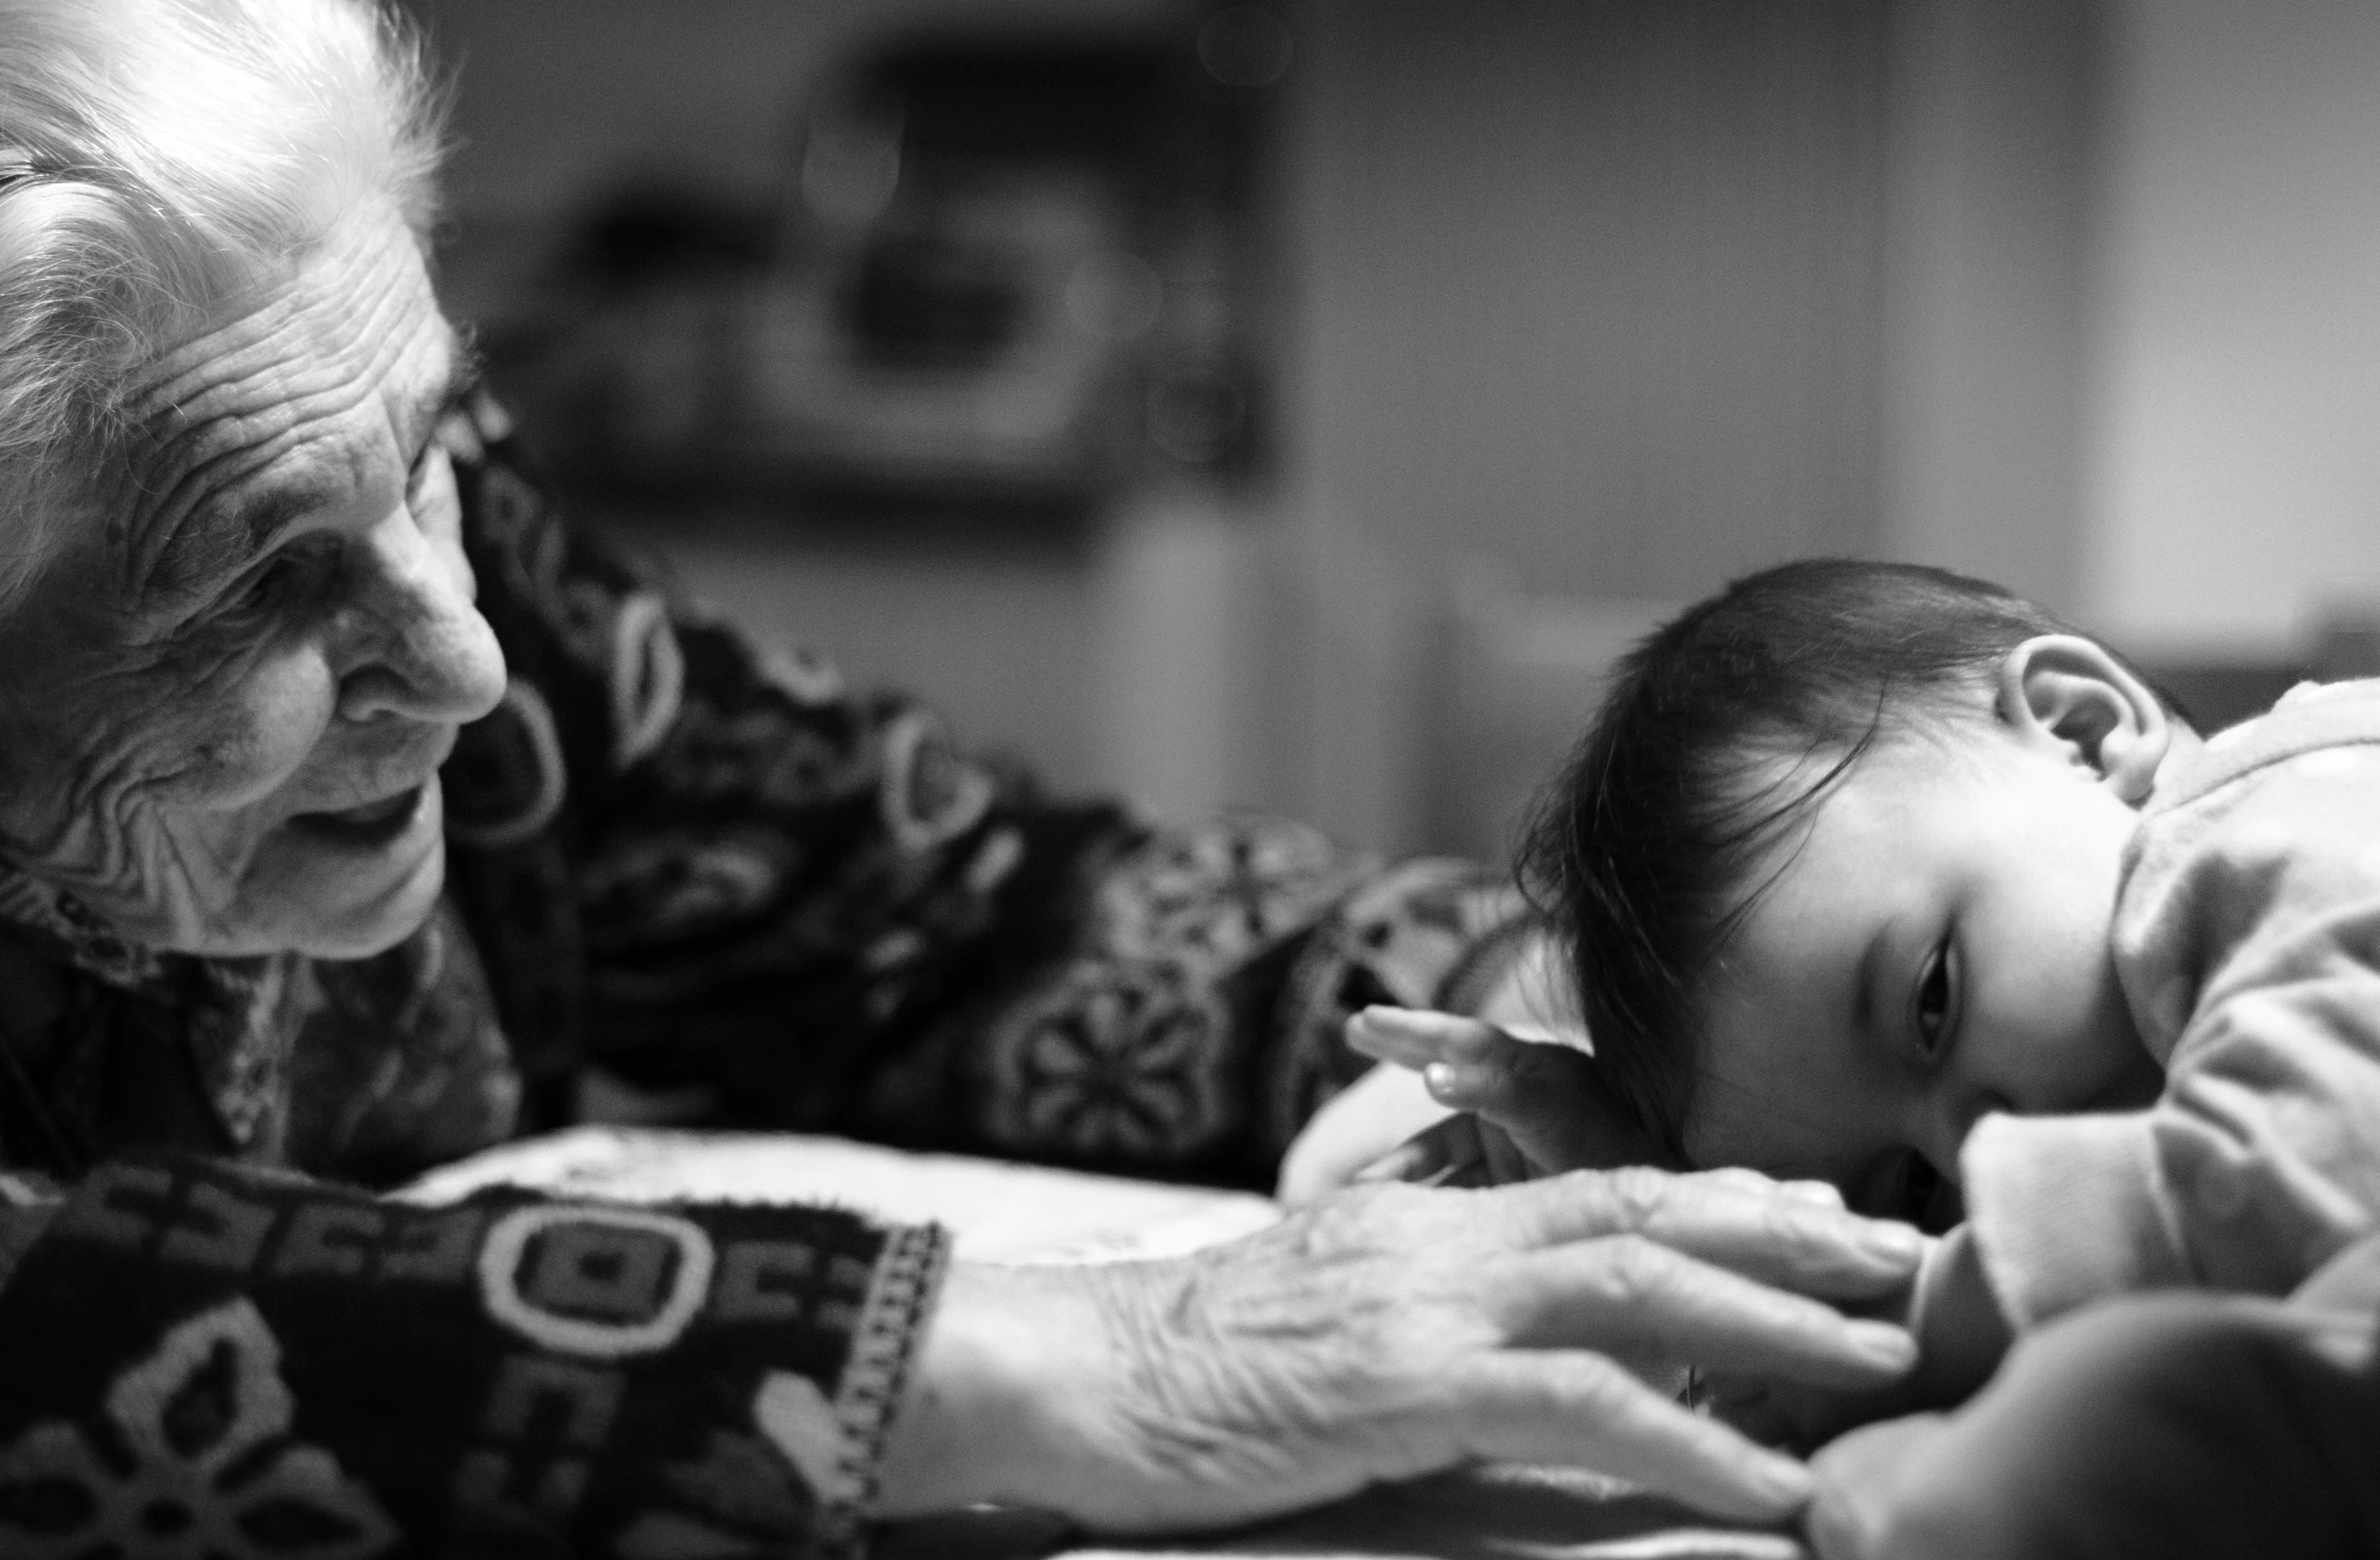 A grayscale picture of an older woman watching a baby. | Source: Unsplash